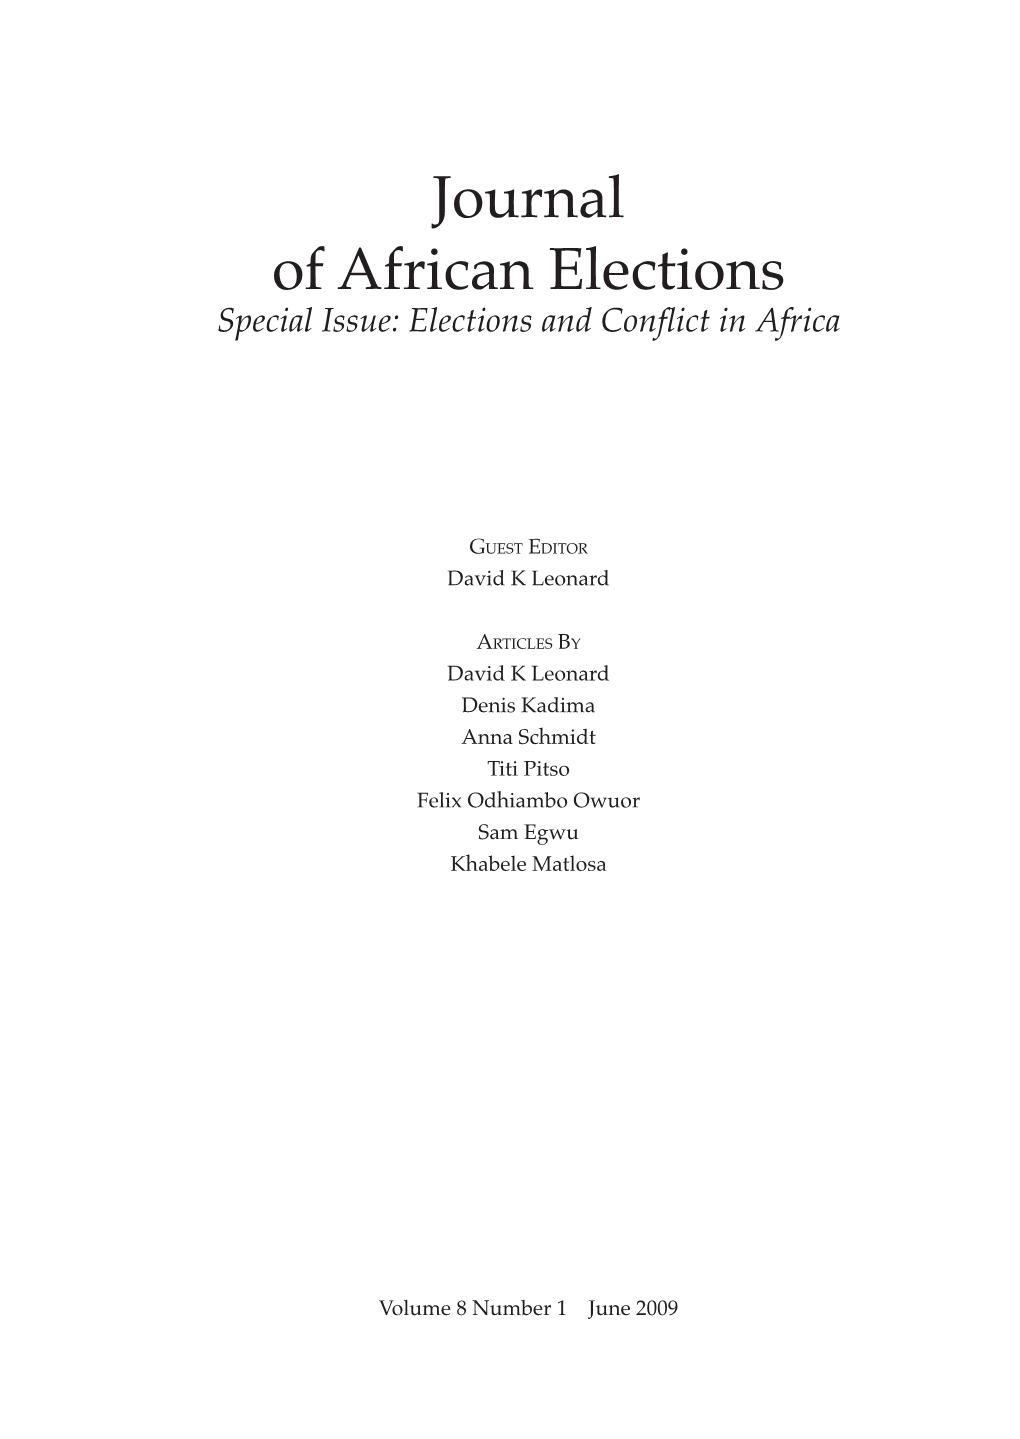 Journal of African Elections Special Issue: Elections and Conflict in Africa